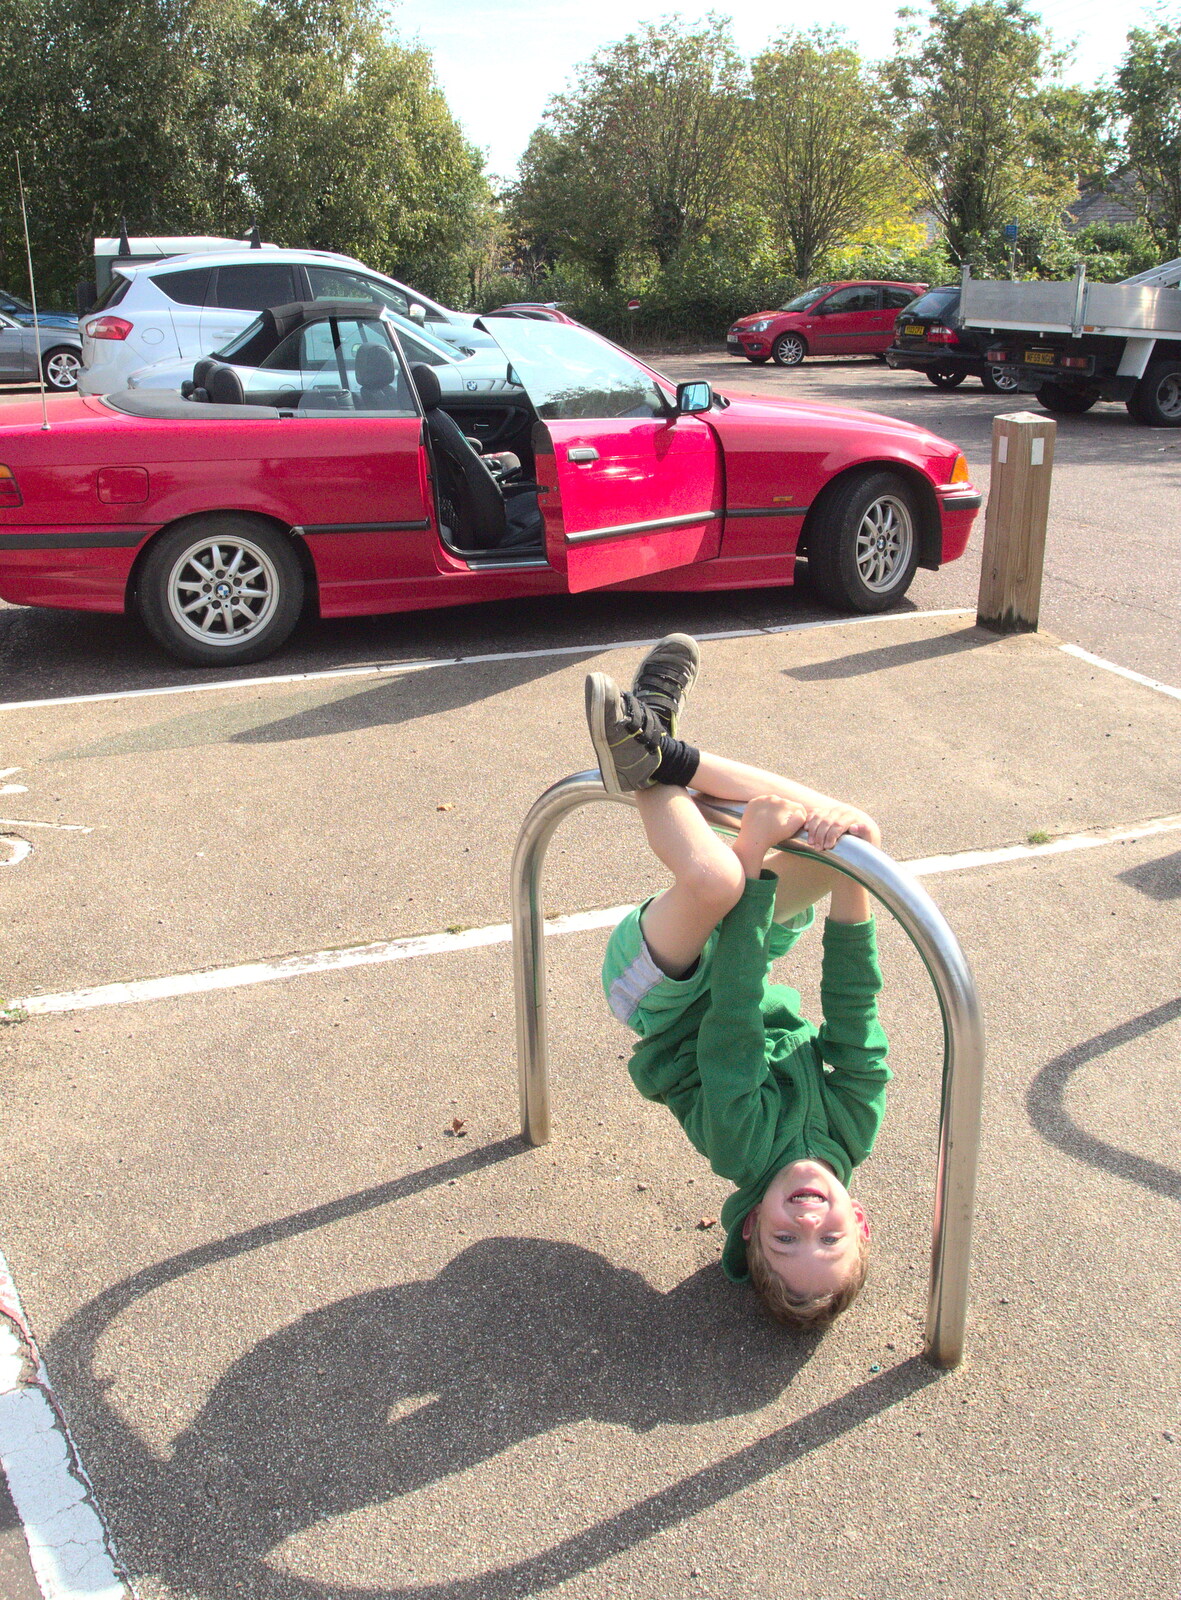 Fred's upside down in the car park from Fred's Birthday Bicycle at Madgett's, Diss, Norfolk - 23rd September 2016